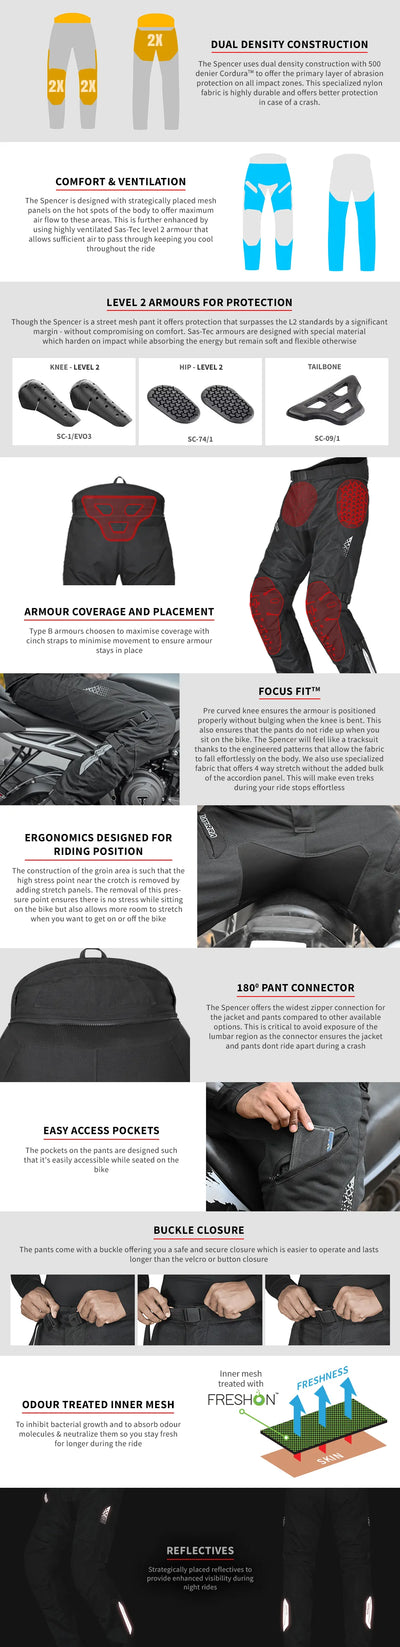 ViaTerra spencer – street mesh motorcycle riding pants have best features